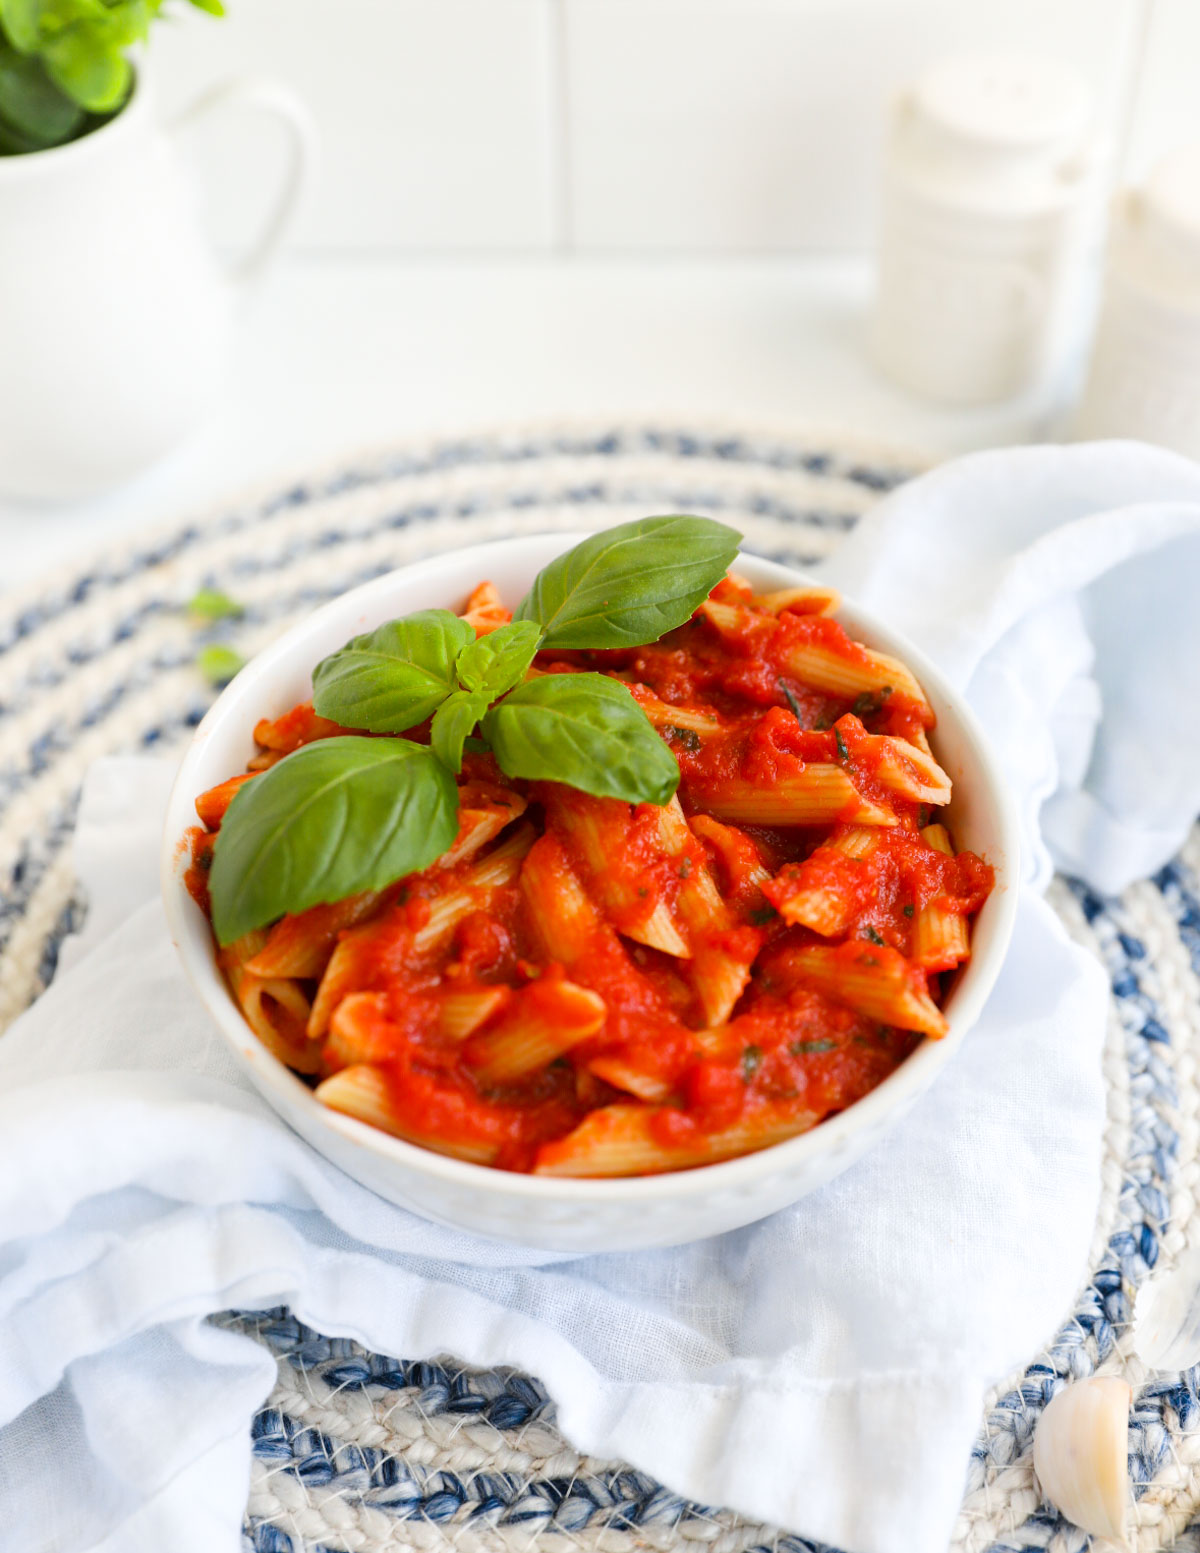 Penne pasta with red pomodoro sauce in a white bowl, garnished with bail.